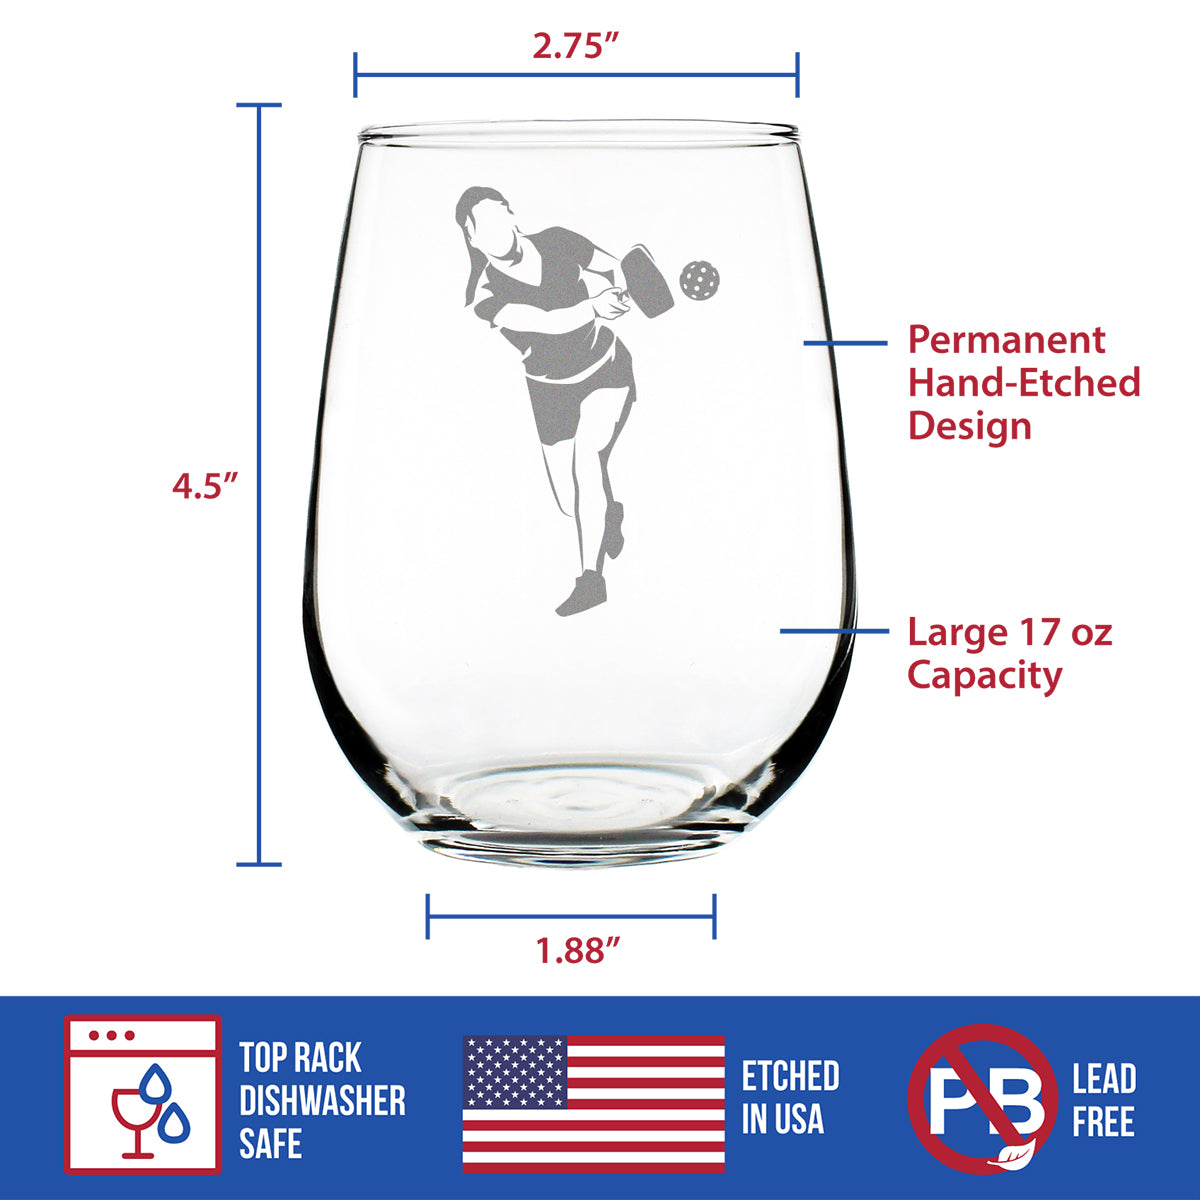 Pickleball Player Female - Stemless Wine Glass - Funny Pickleball Themed Decor and Gifts - Large 17 Oz Glasses